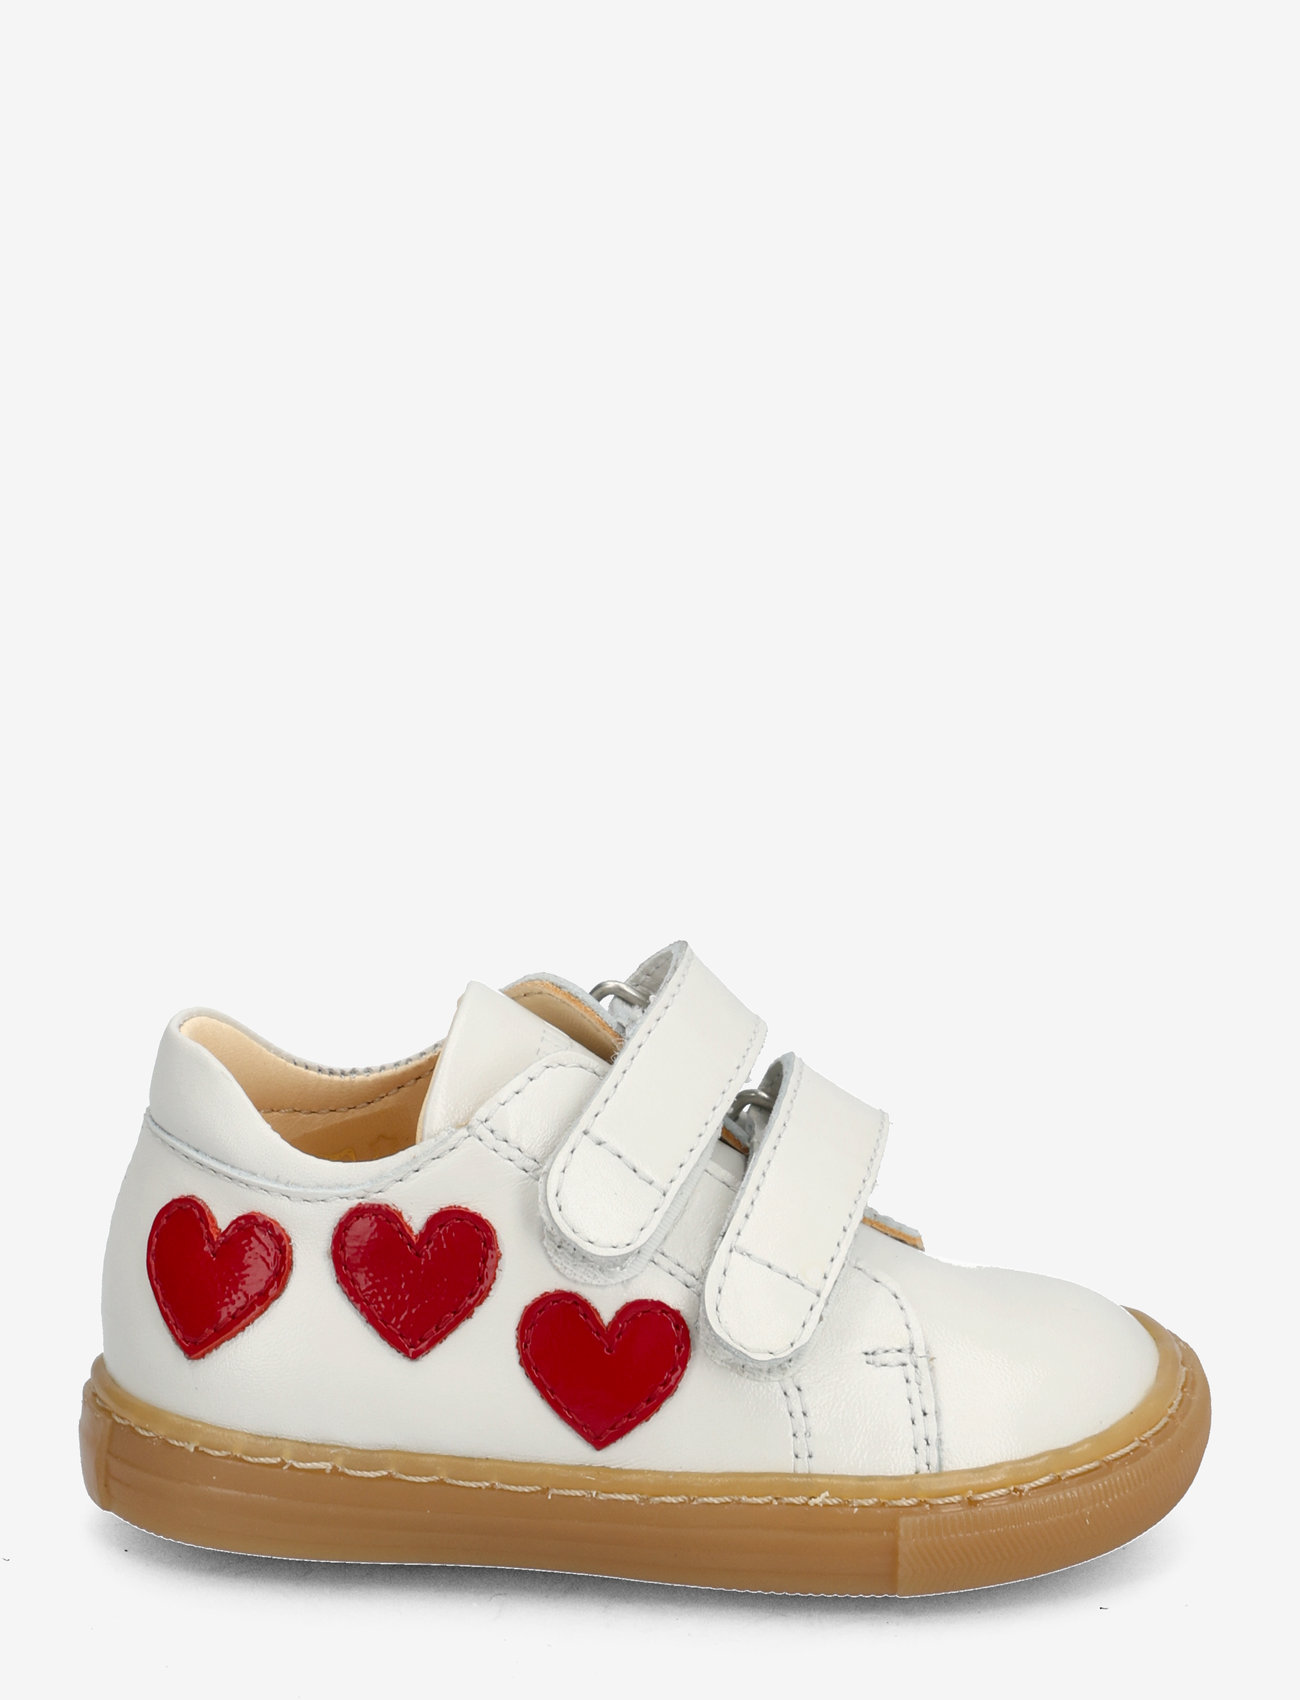 ANGULUS - Shoes - flat - with velcro - vasaros pasiūlymai - 1493/a003 off white/hearts - 1